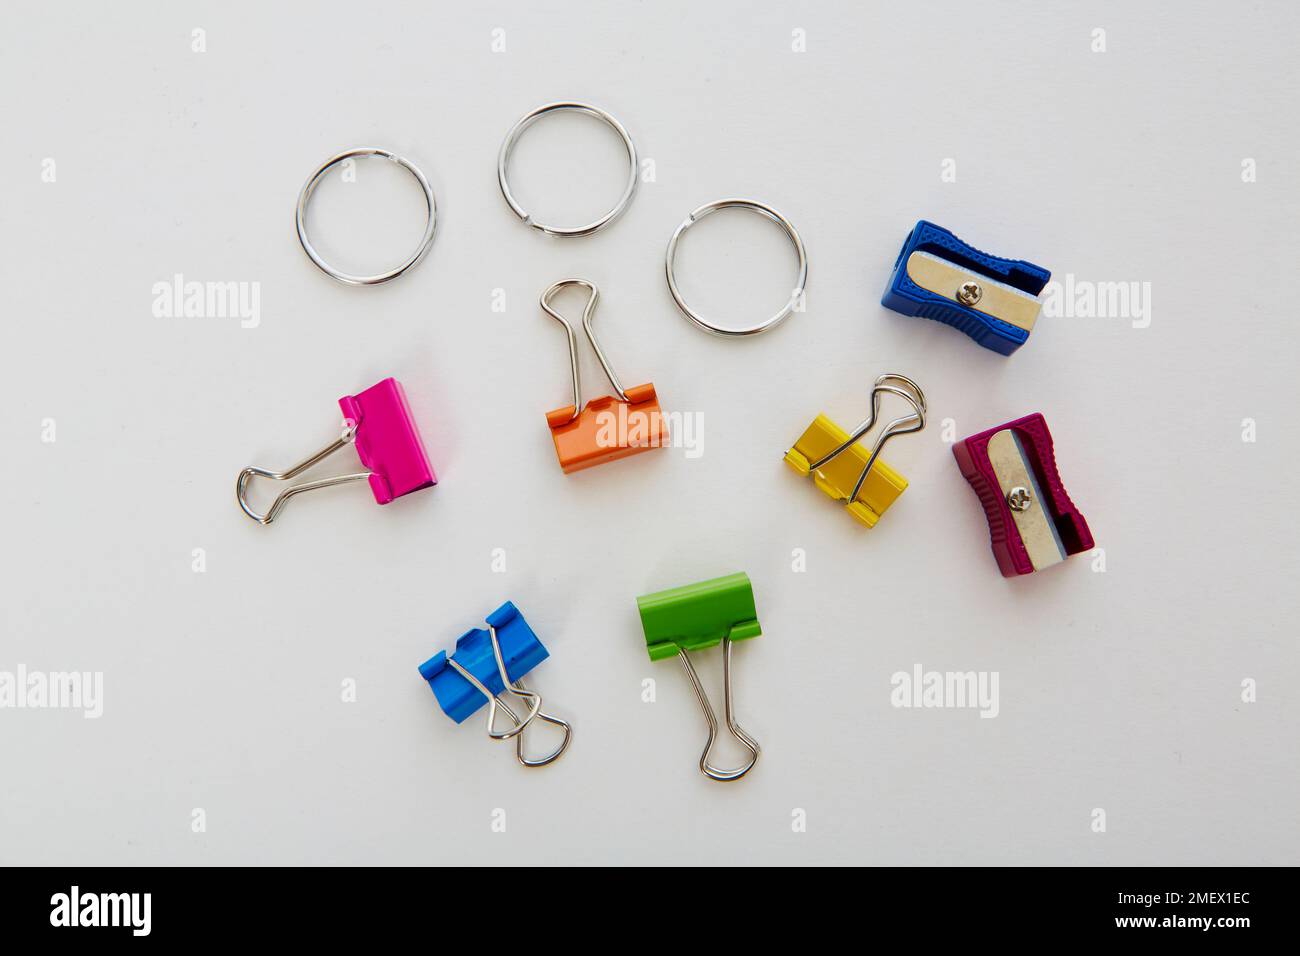 Clips, pencil sharpeners and metal rings Stock Photo